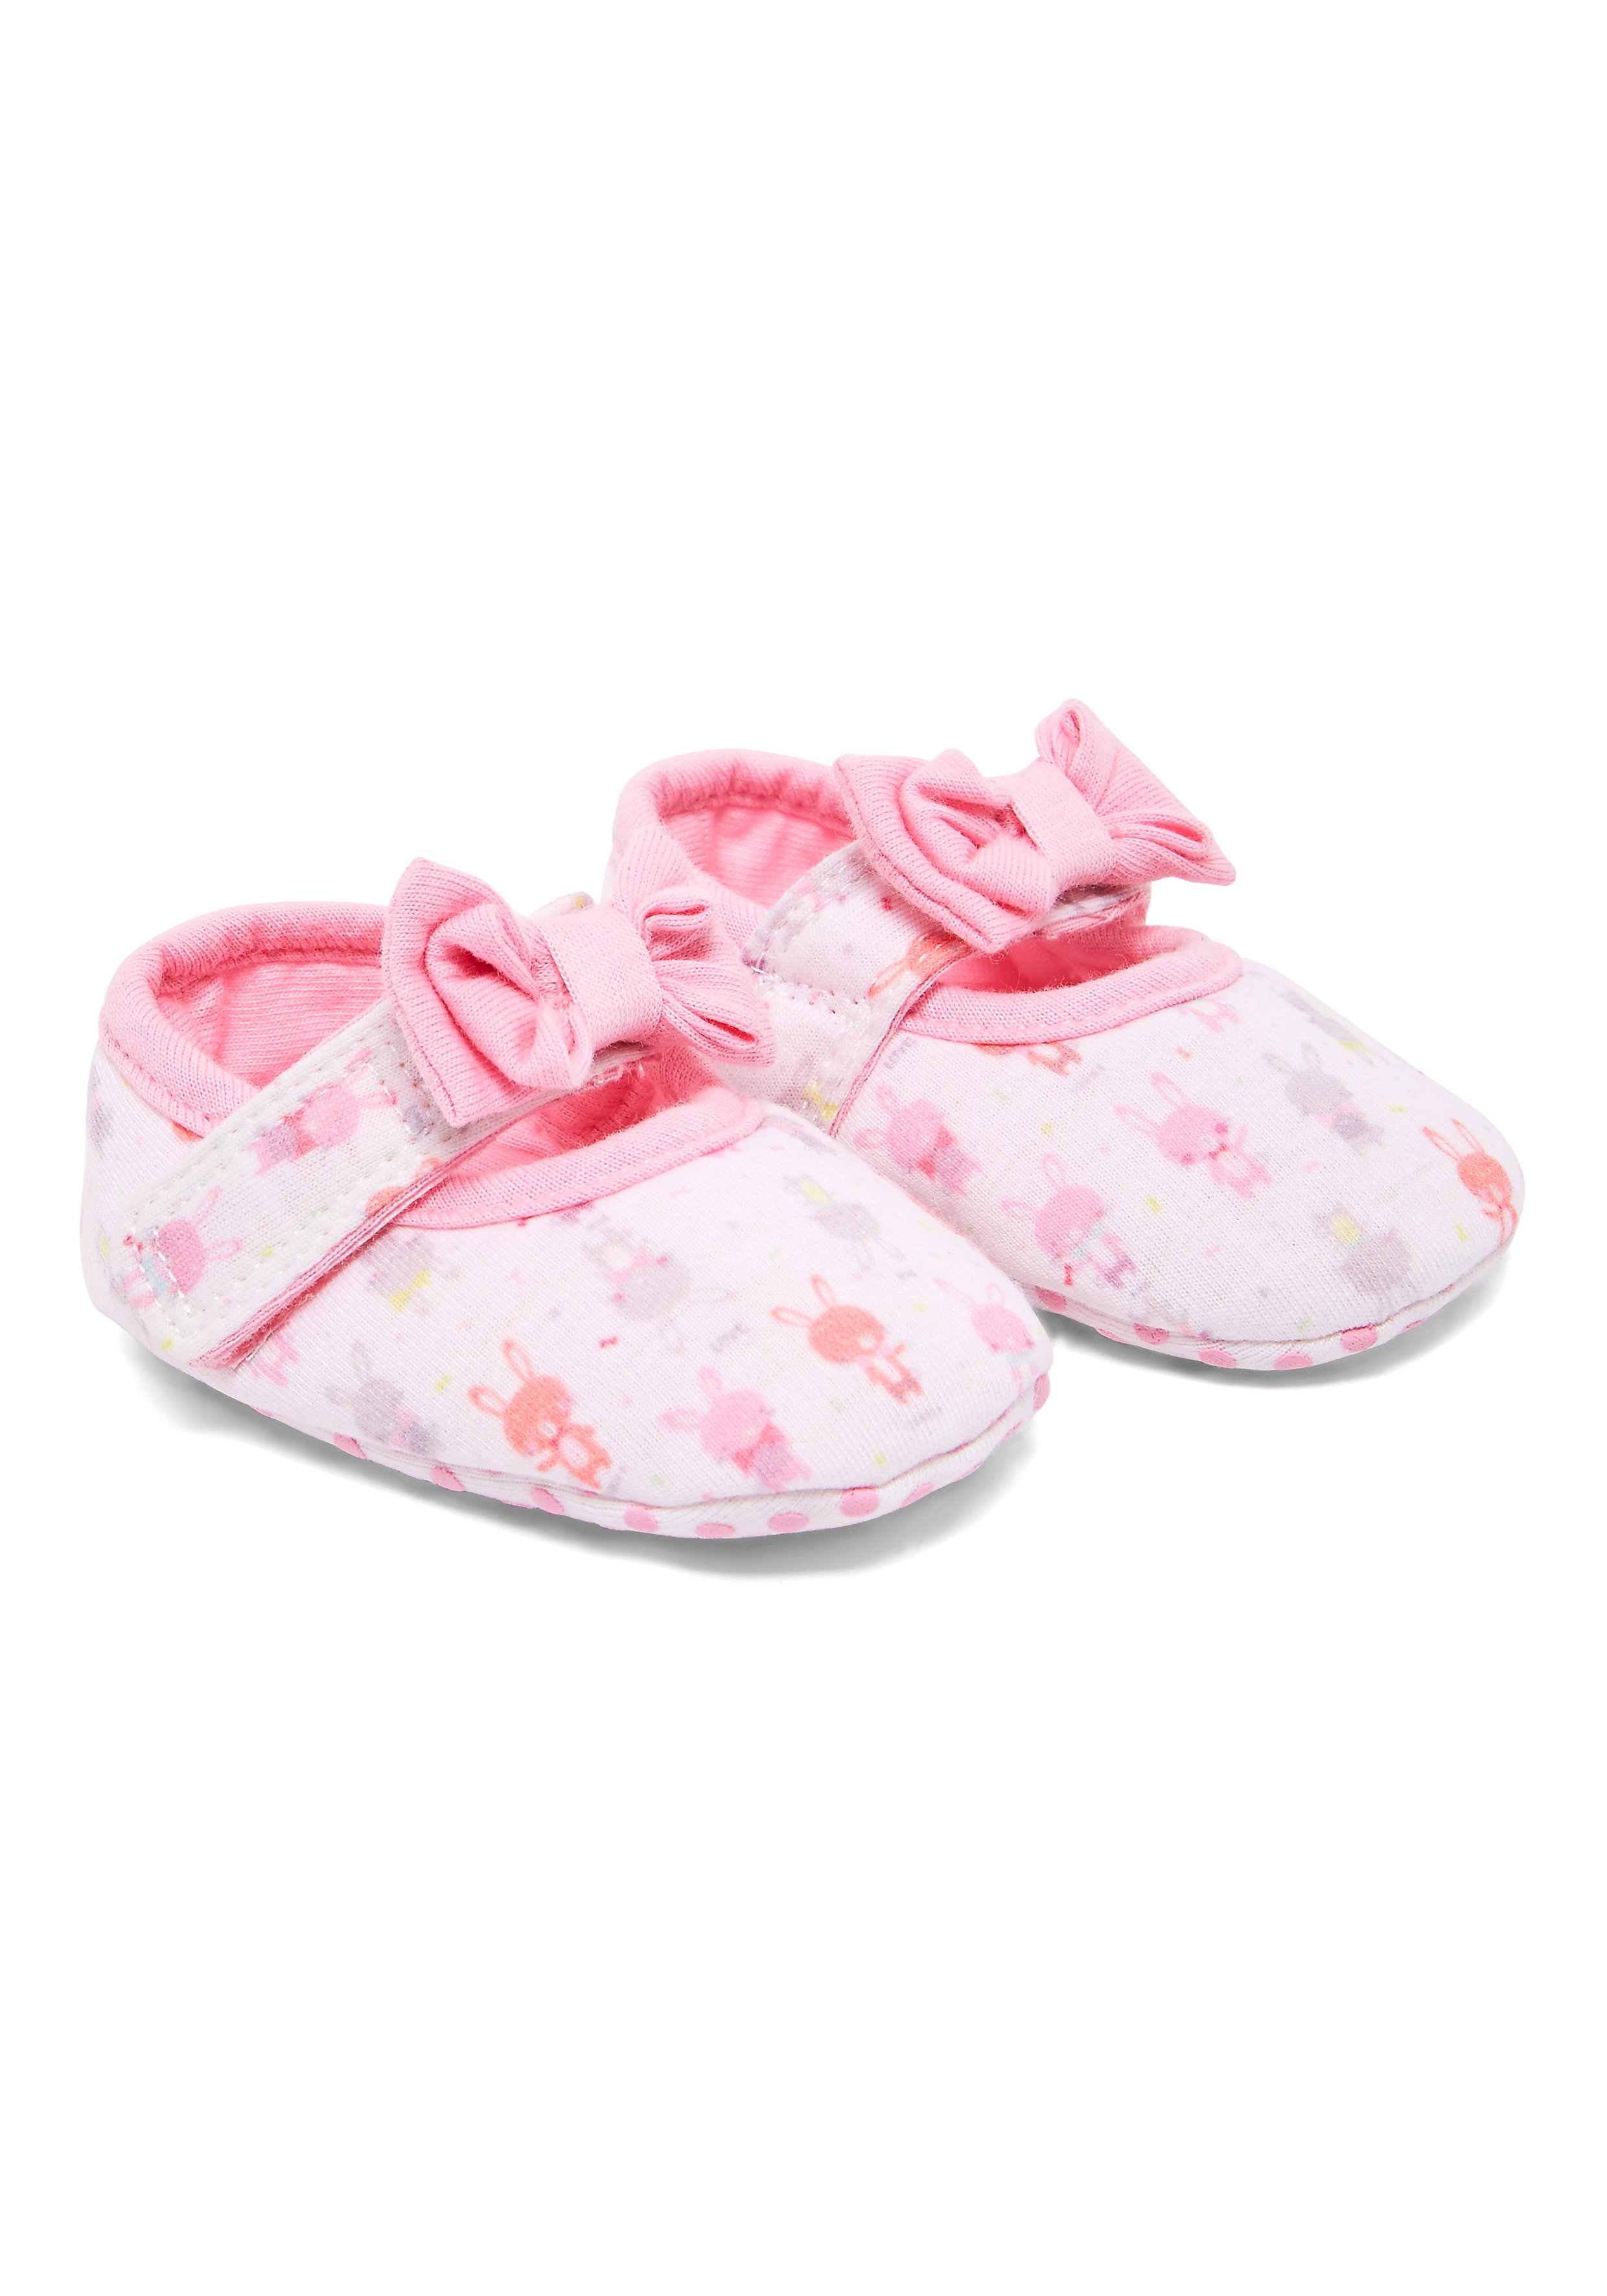 Mothercare | Girls Bunny Mary Jane Shoes - Pink